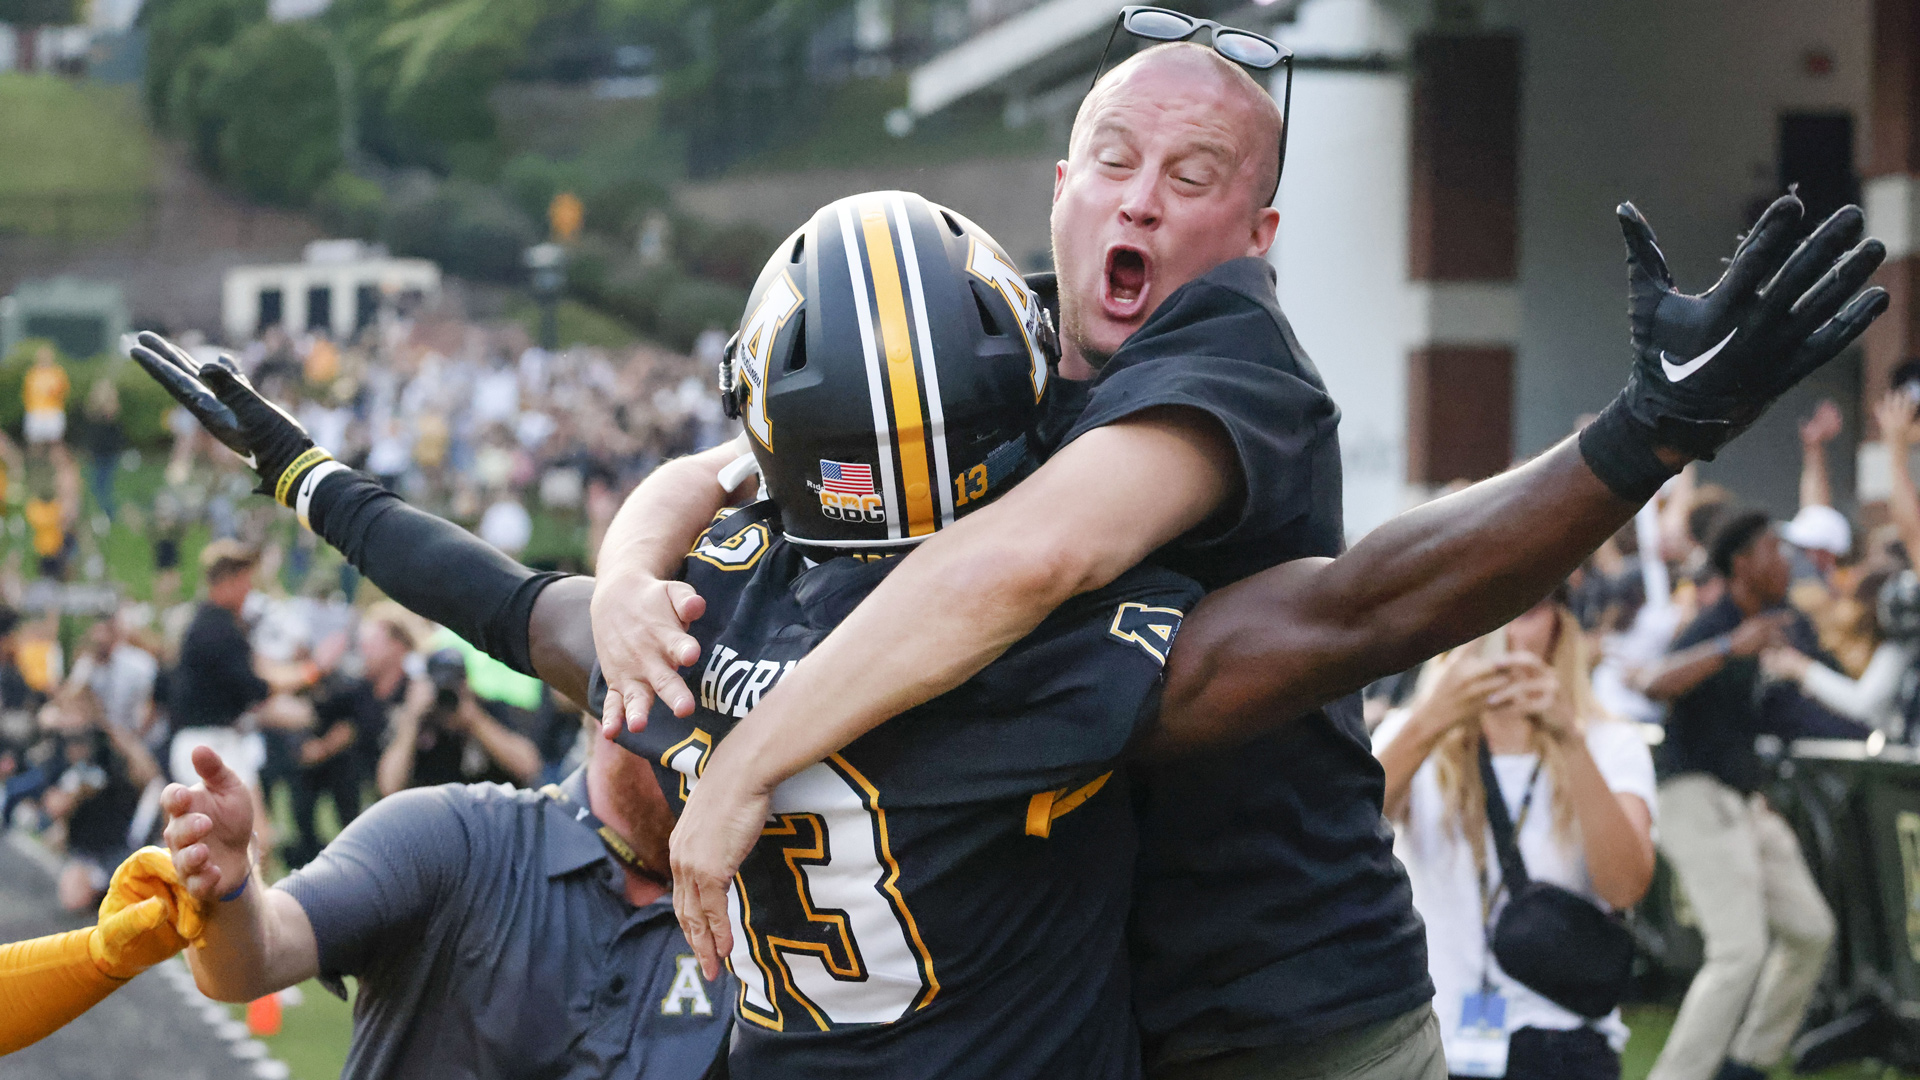 Watch Appalachian State's Improbable Walk-Off Hail Mary Vs. Troy